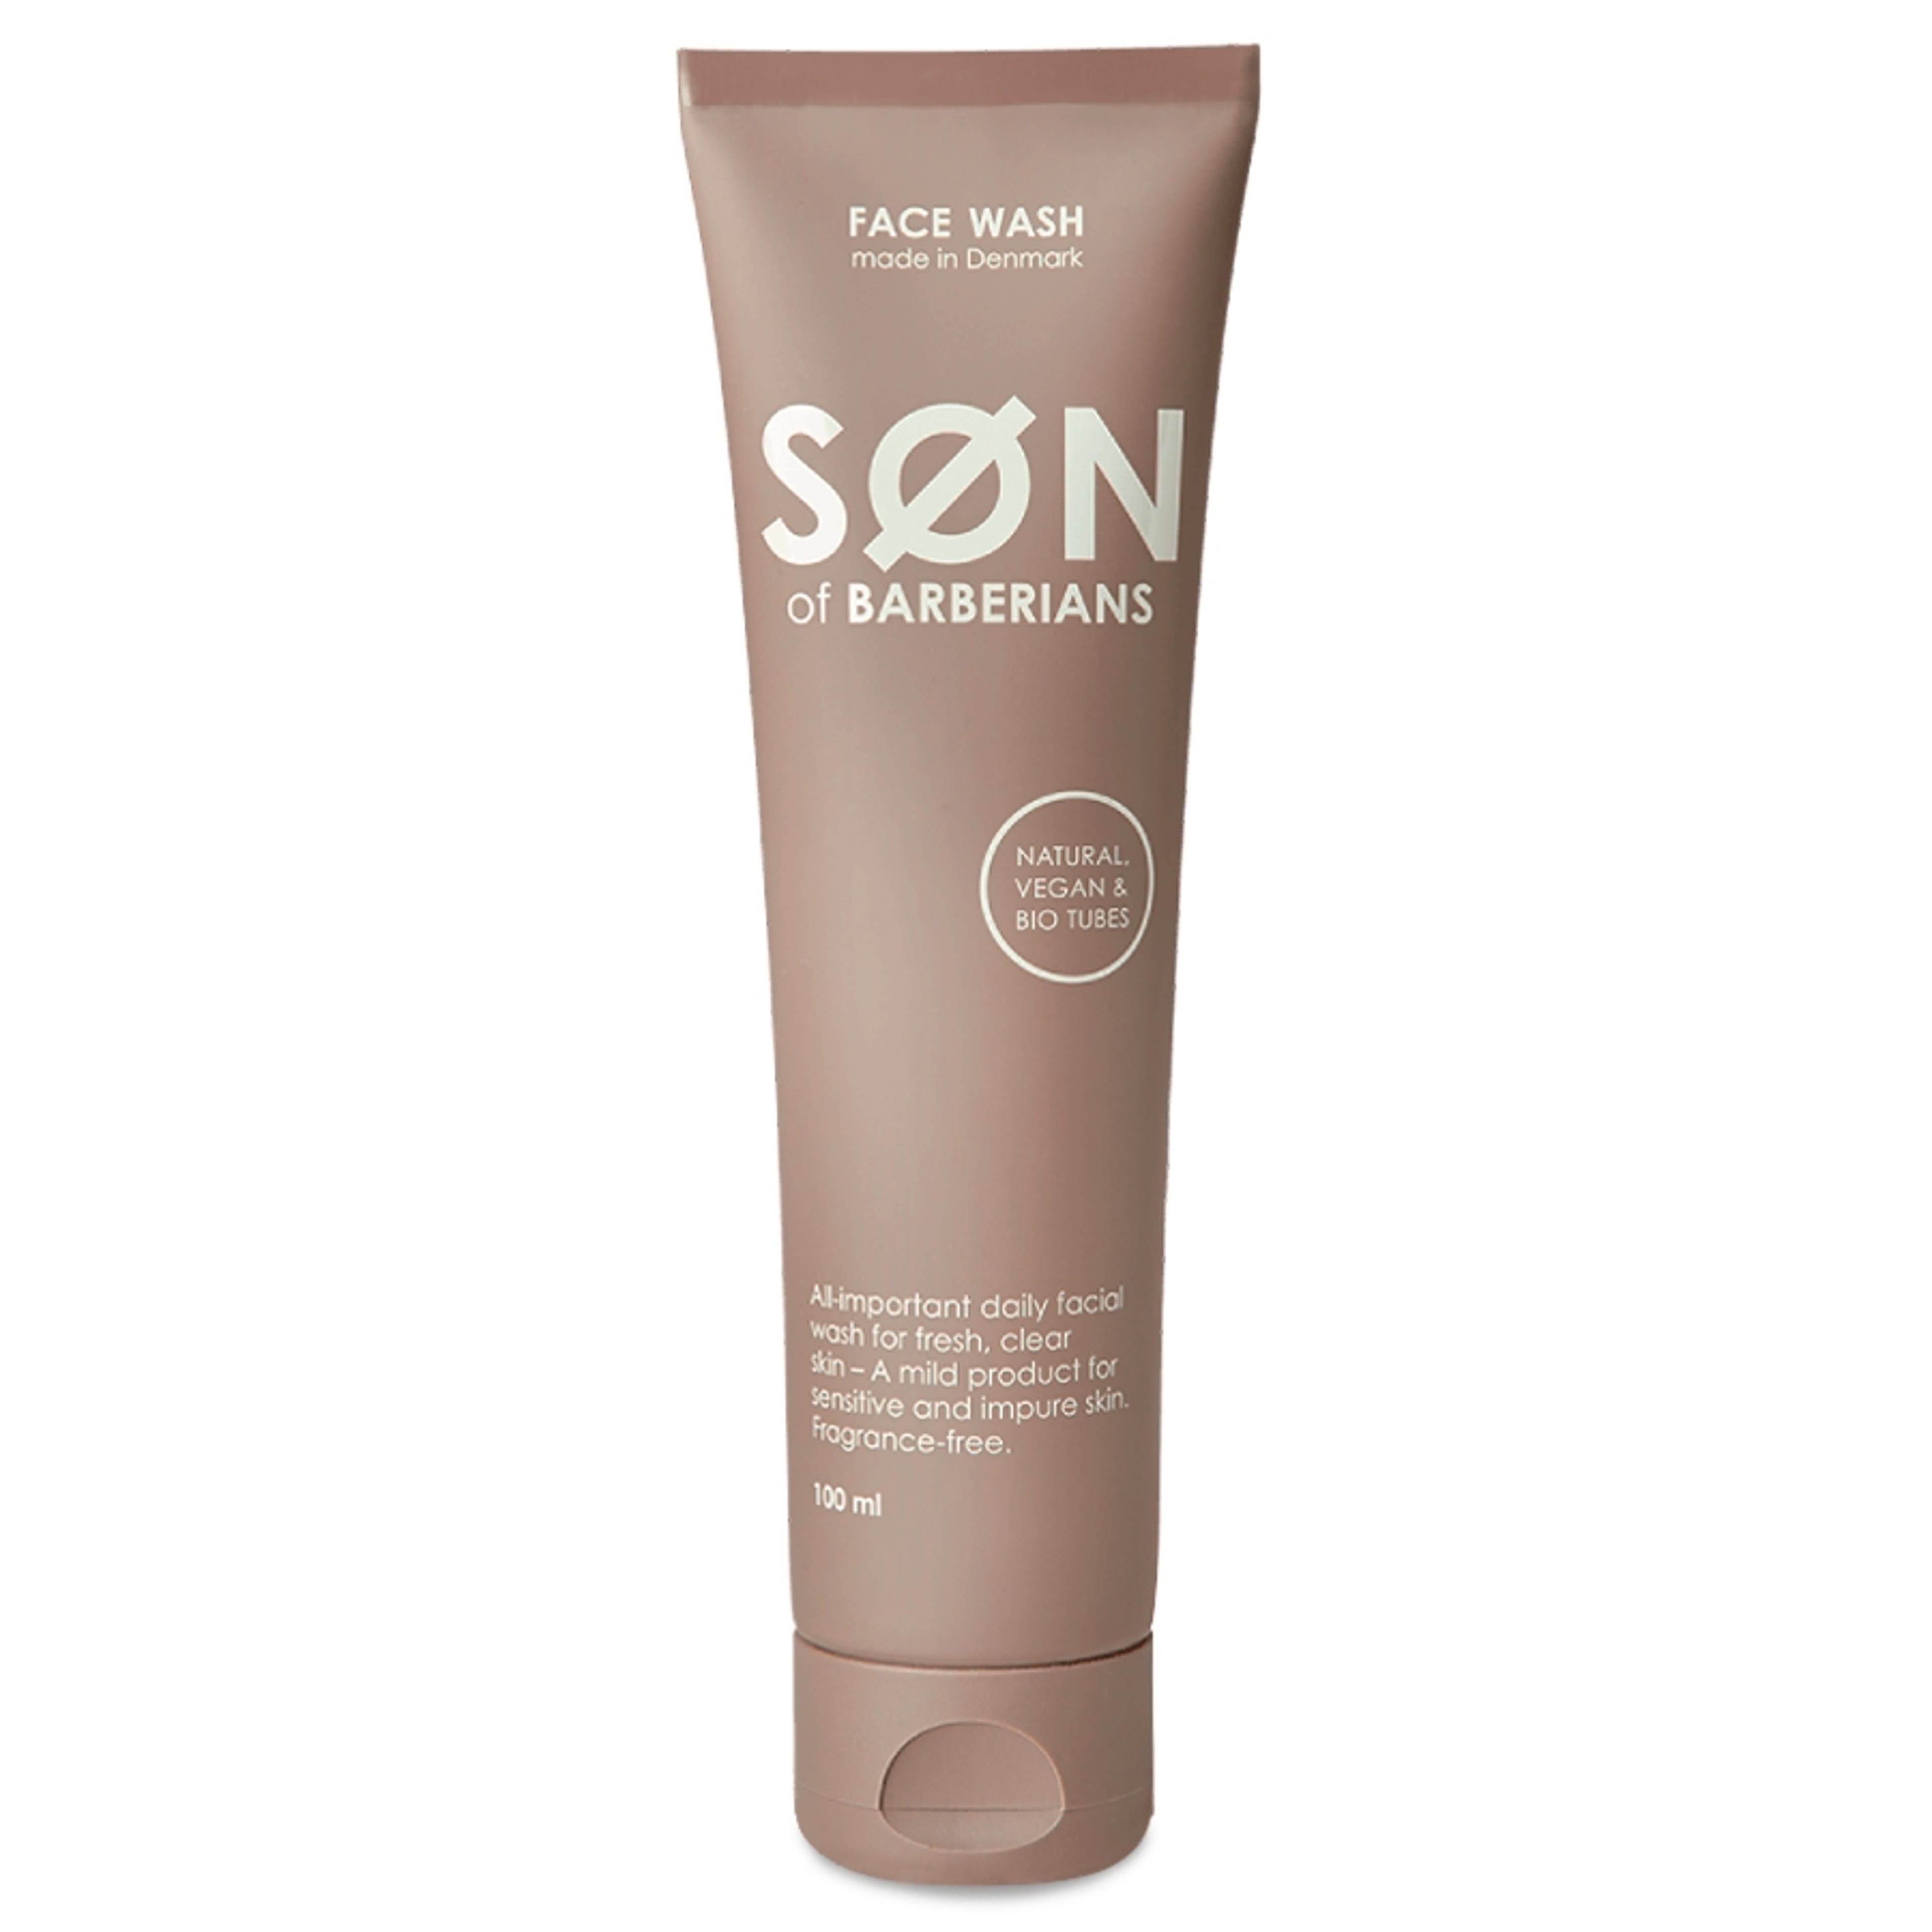 Søn of Barberians - Face Wash